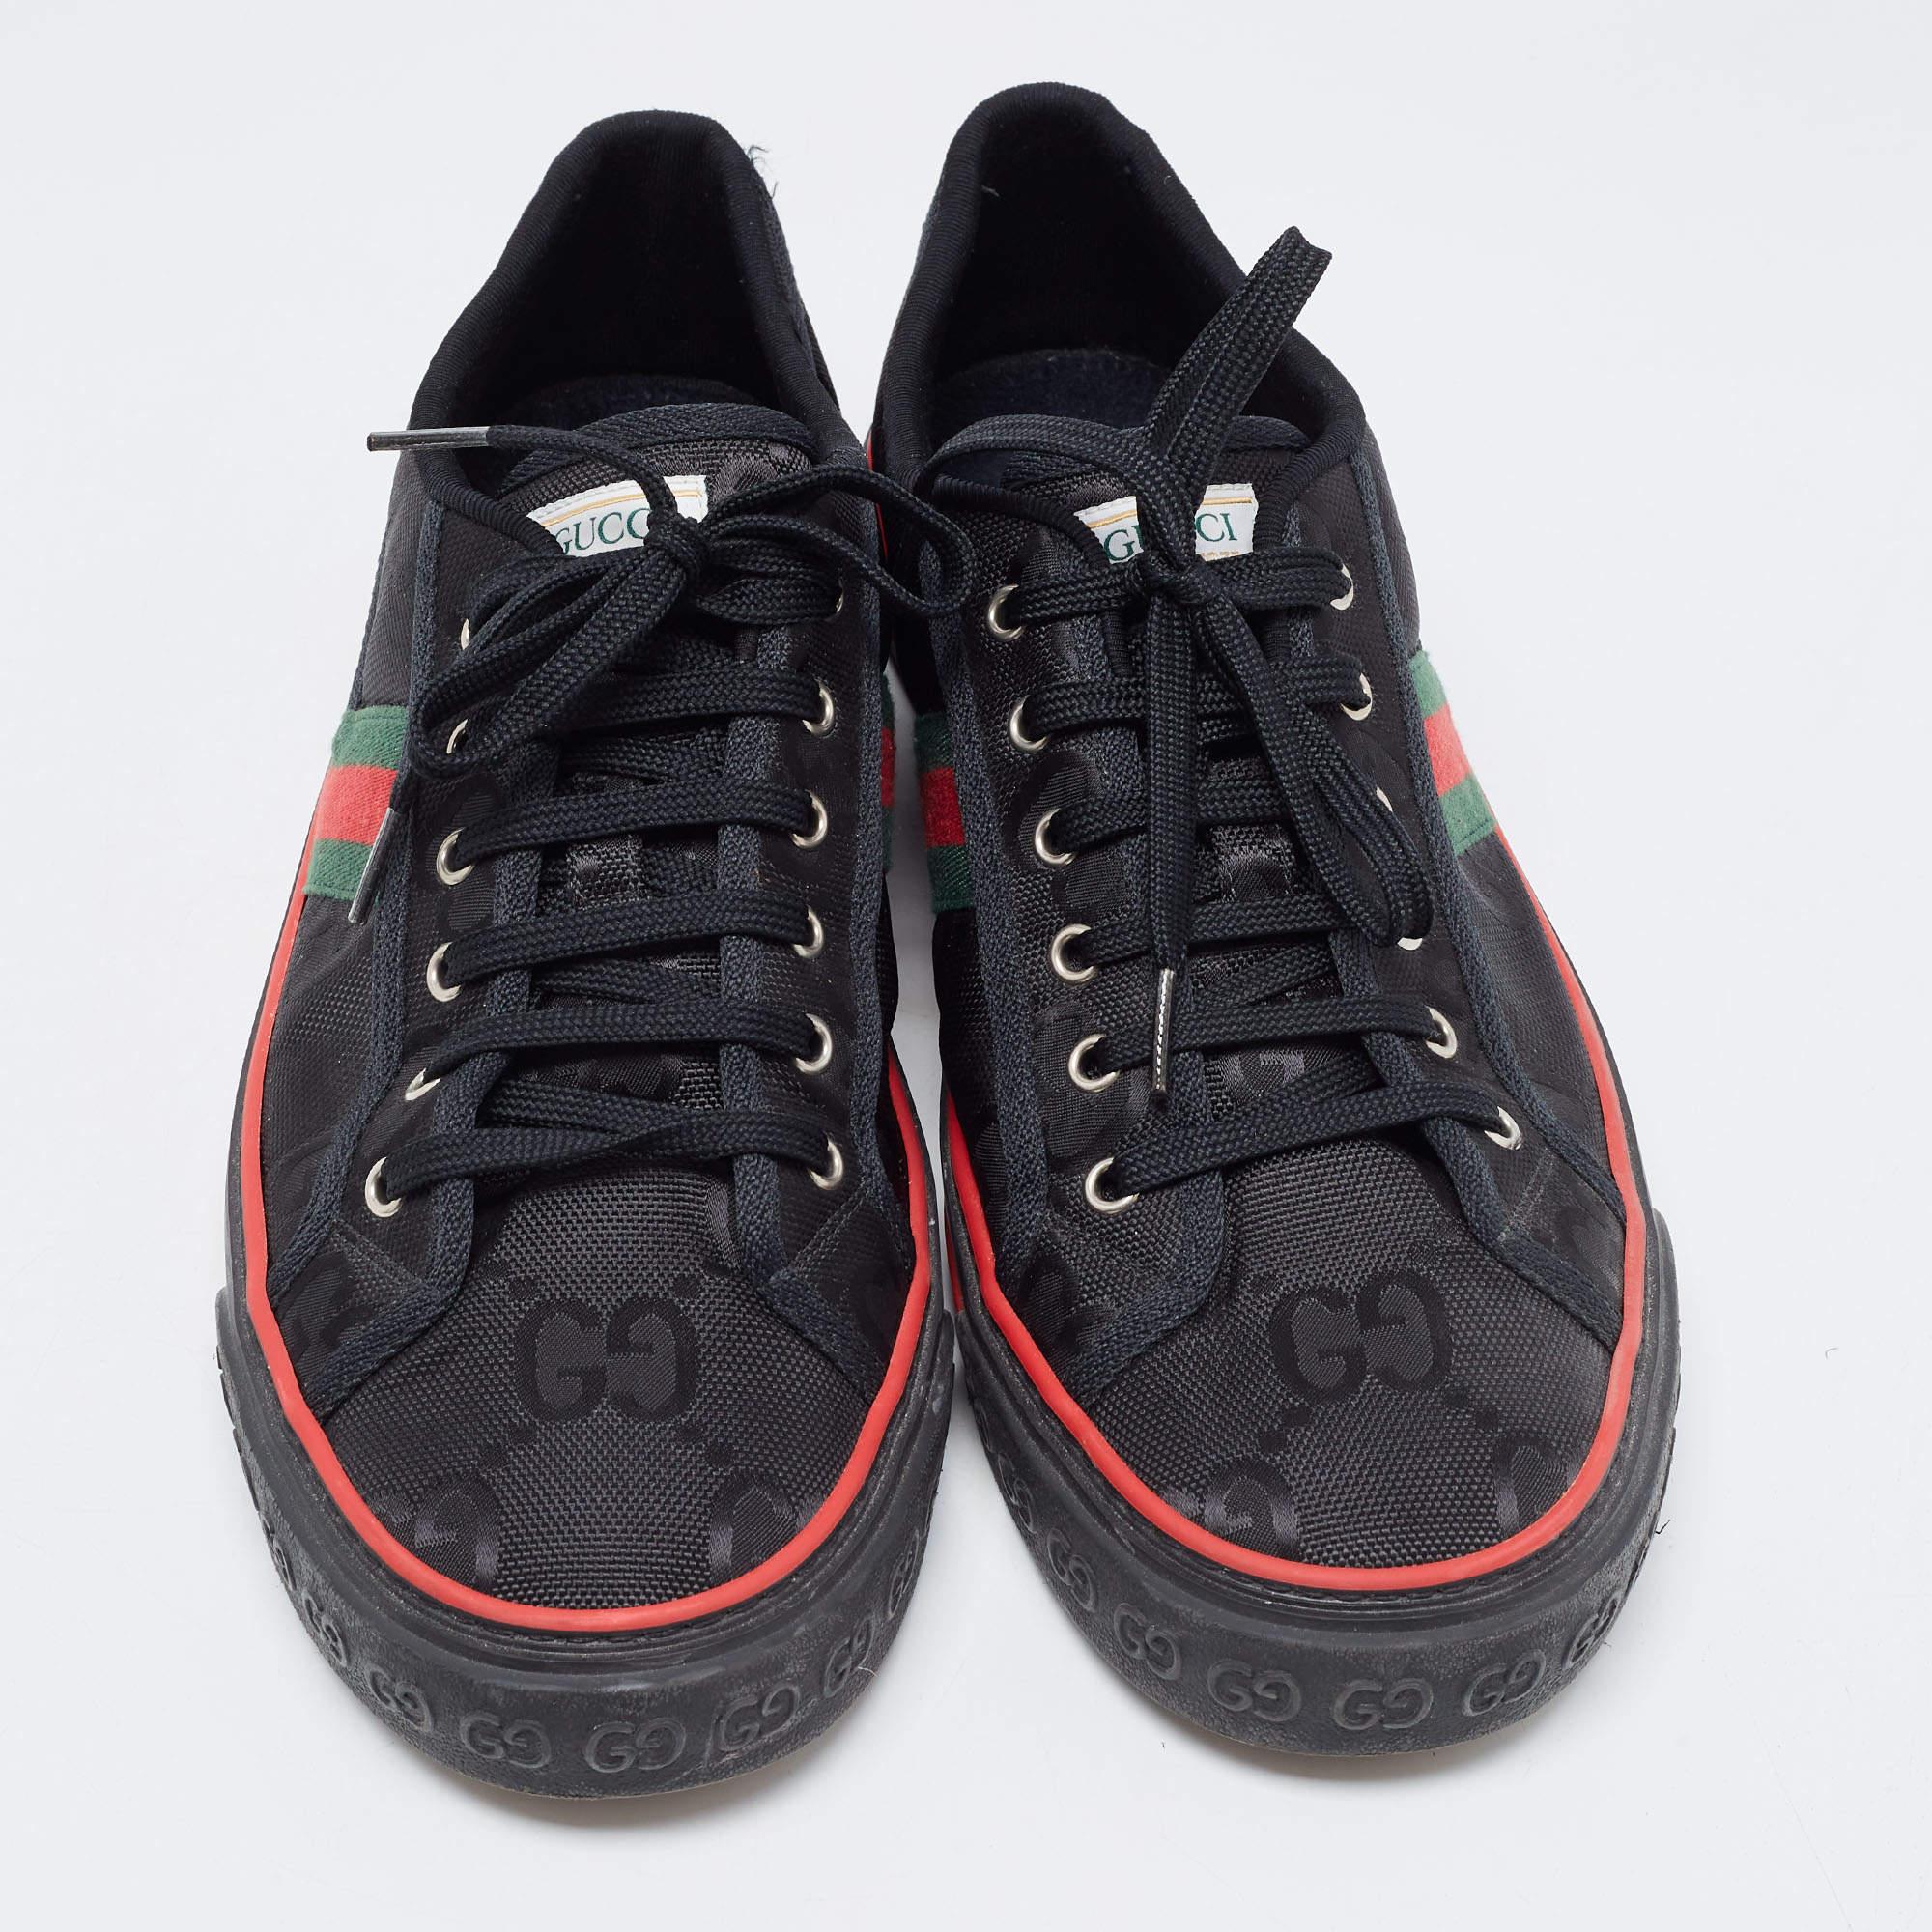 An everyday pair you're going to love is this one by Gucci. These designer sneakers are sewn in canvas and detailed with lace-ups and signature elements.

